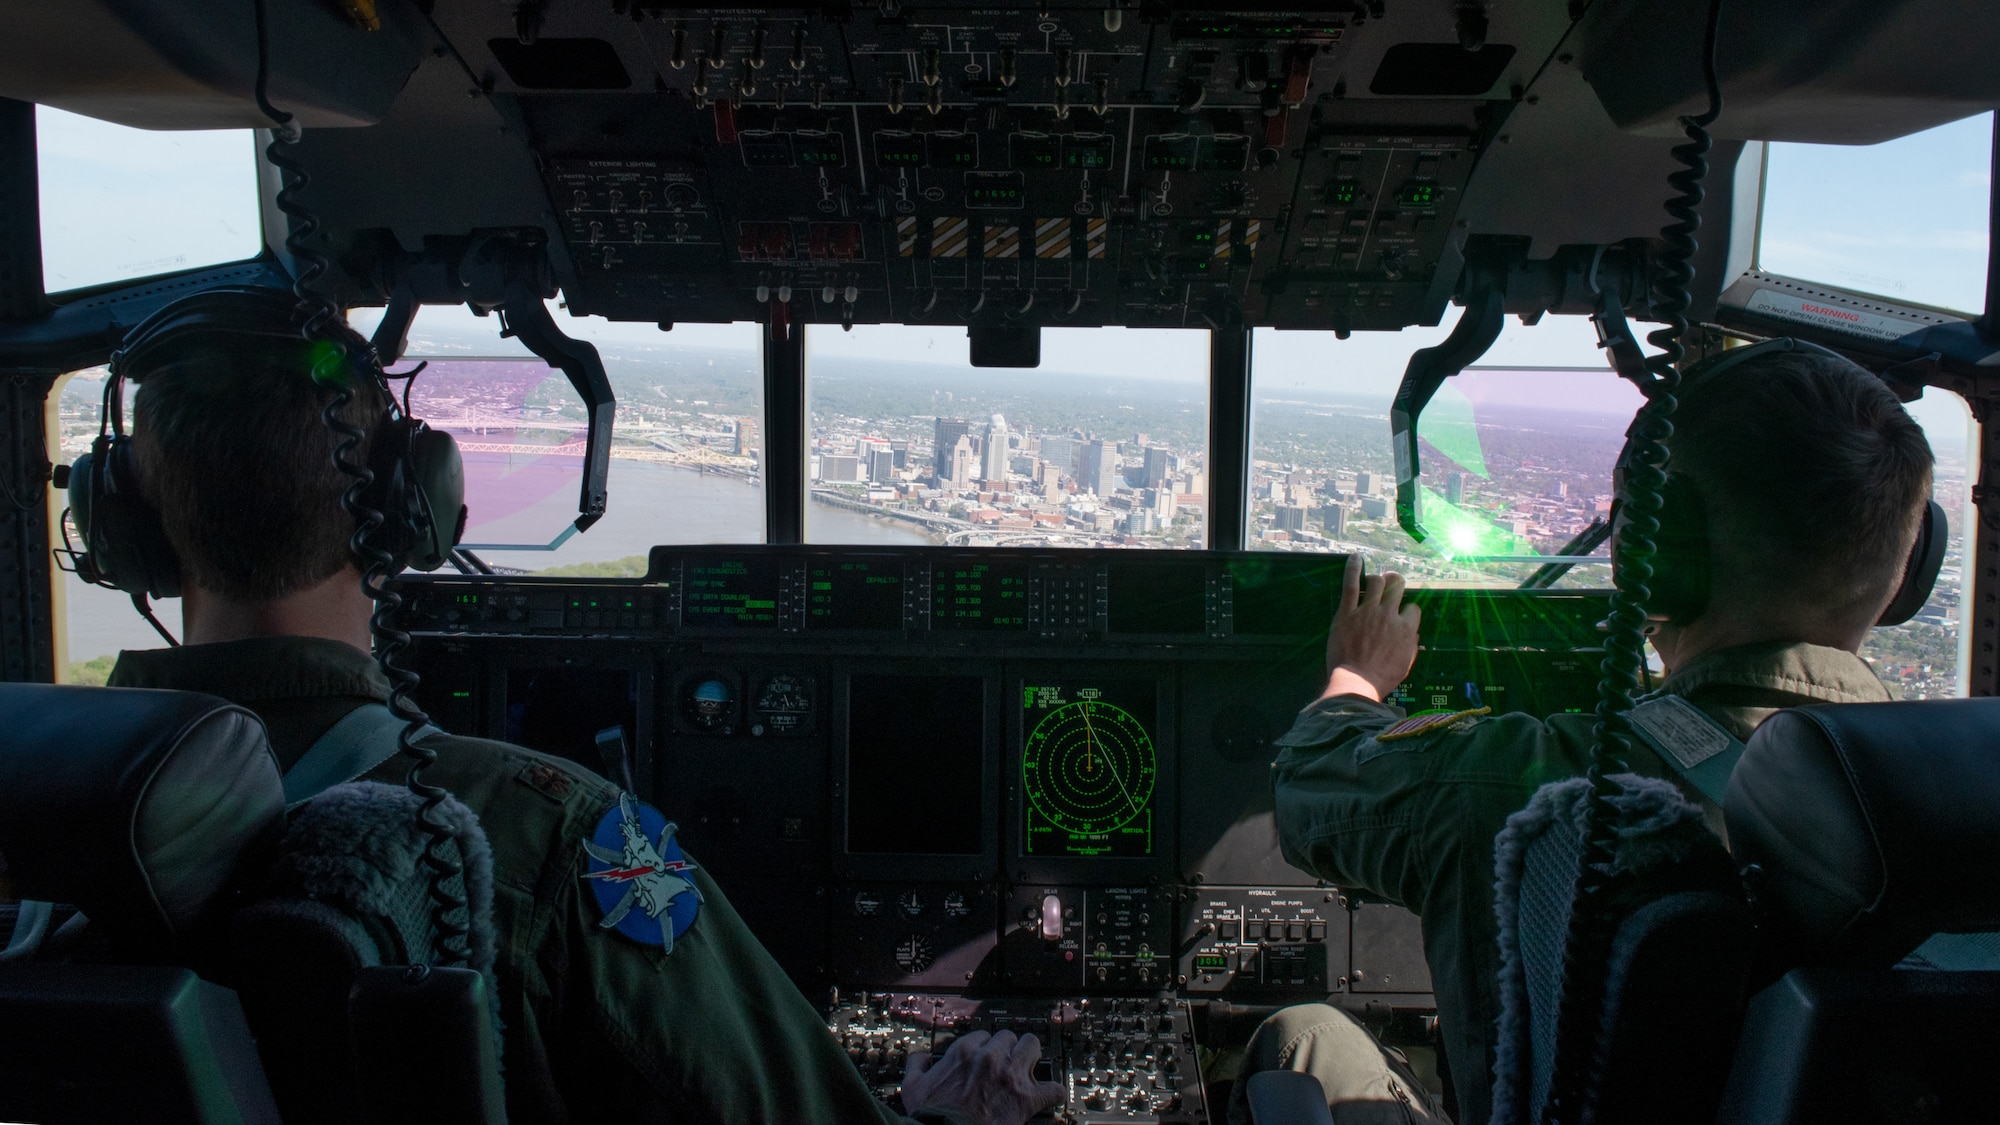 Maj. Chris Boelscher (left) and 1st Lt. Daniel Wormley (right), both C-130J Super Hercules pilots with the Kentucky Air National Guard’s 165th Airlift Squadron, perform their second pass during the Thunder Over Louisville air show on April 23, 2022, in Louisville, Ky. Boelscher flew the C-130J as Airmen from the Kentucky Air Guard’s 123rd Special Tactics Squadron parachuted into the Ohio River with banners for the United States of America and Kentucky. (U.S. Air National Guard photo by Staff Sgt. Clayton Wear)